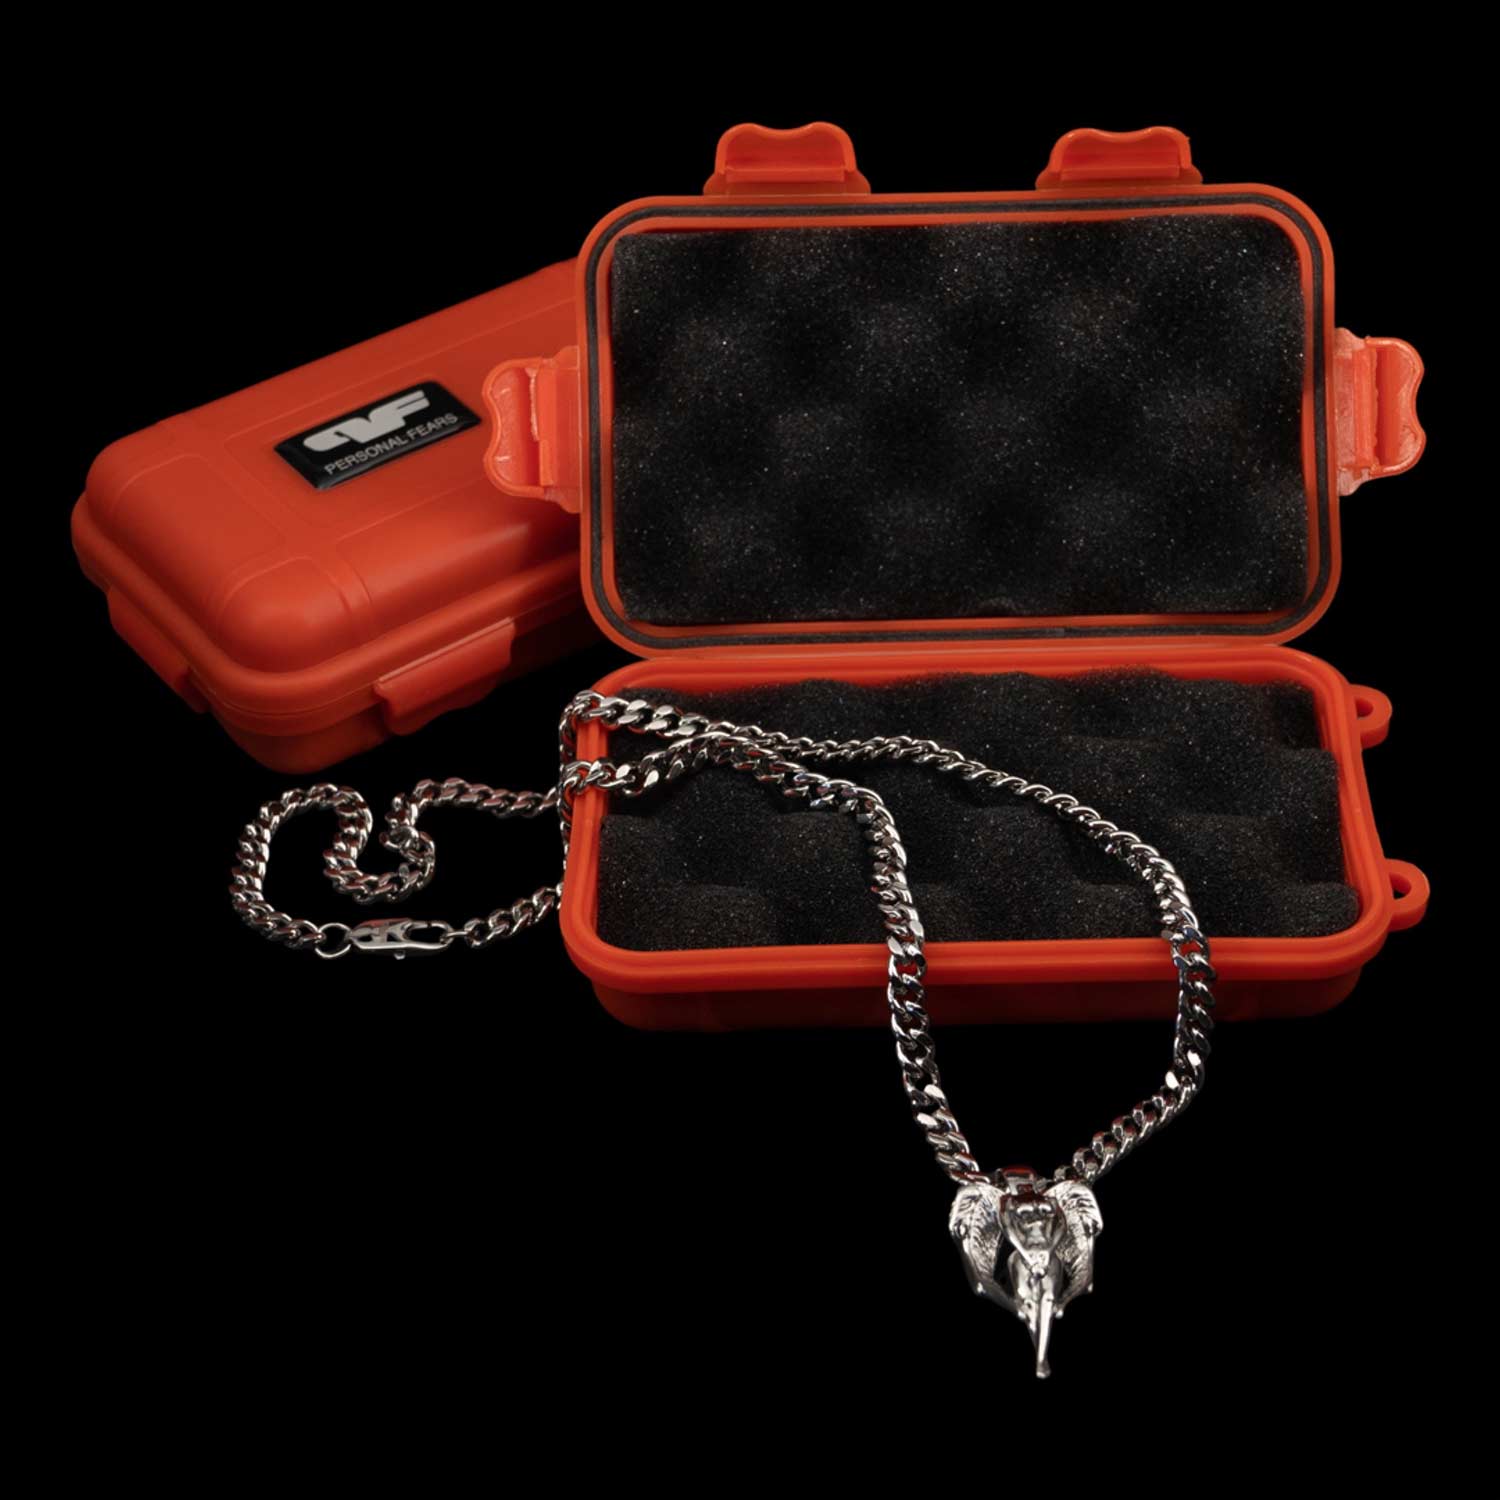 Personal Fears Orange Box "Protect Me" Angel Pendant Stainless Steel Jewelry